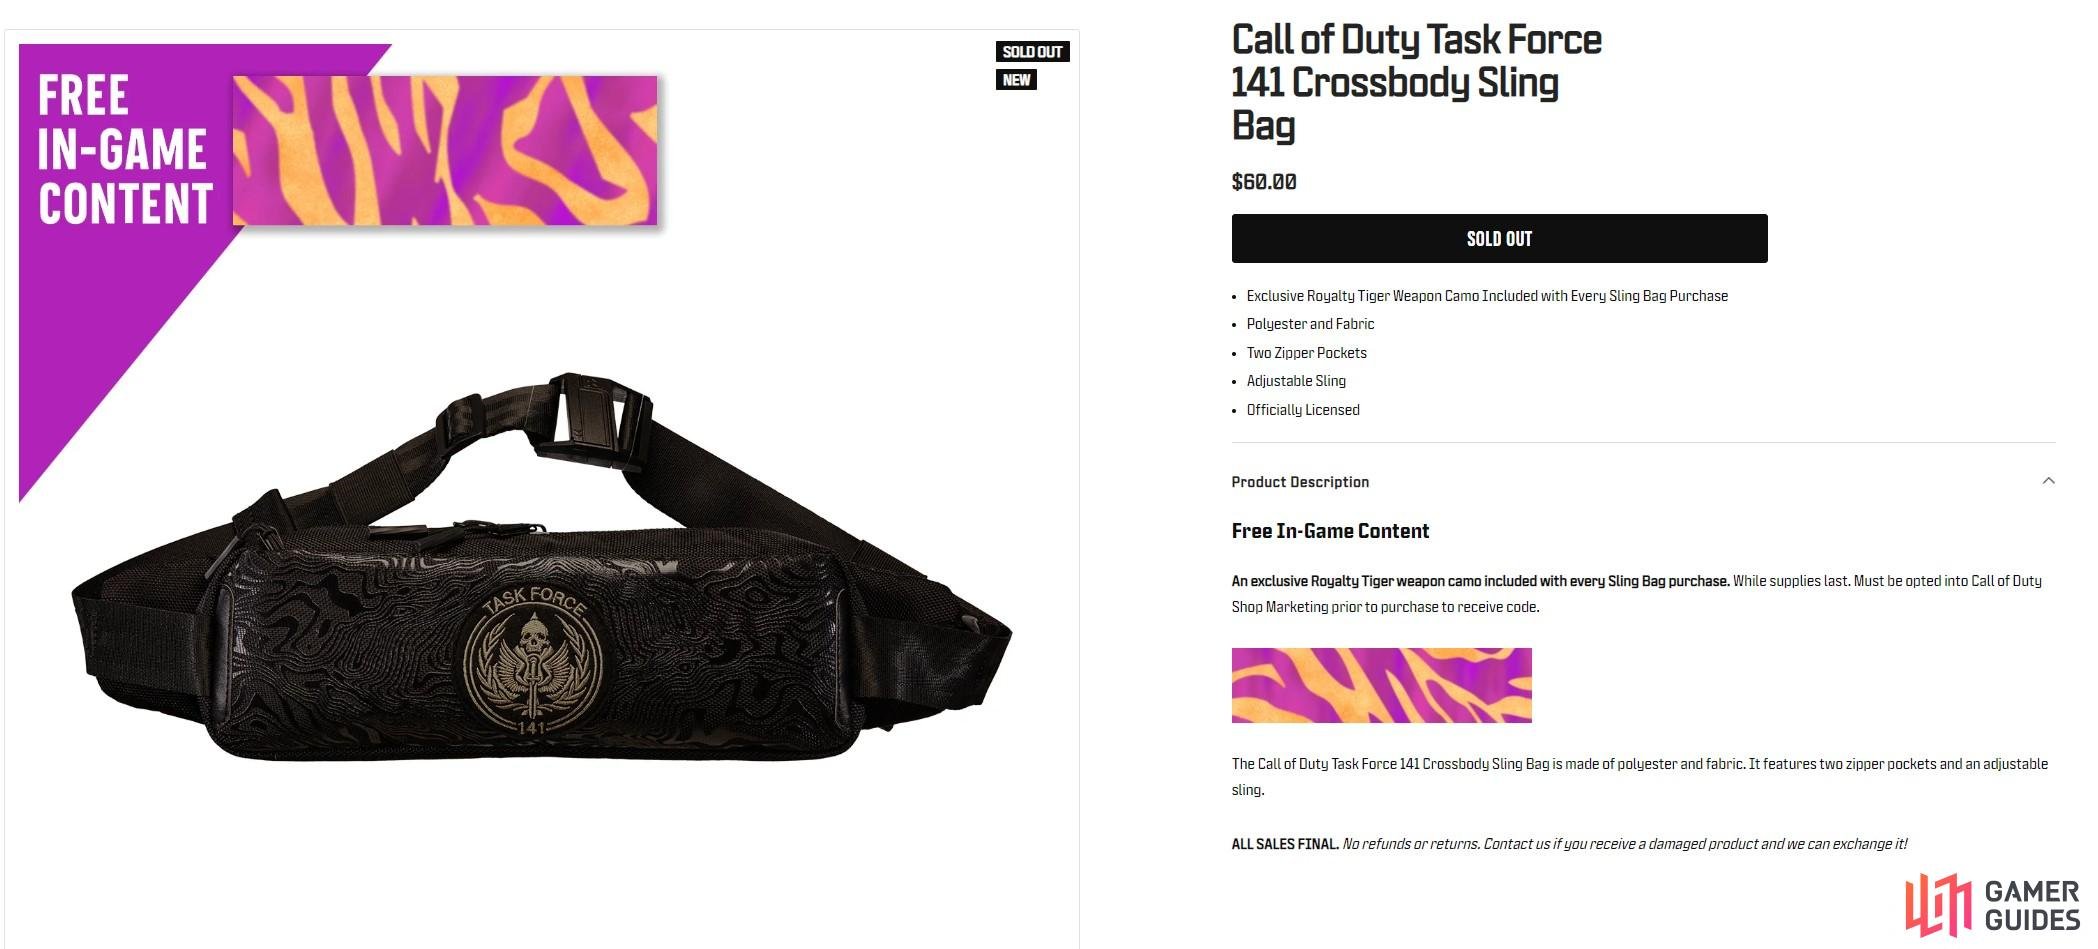 You’ll need to purchase the Call of Duty Task Force 141 Crossbody Sling Bag in order to obtain the Royalty Camo. Image via Activision.